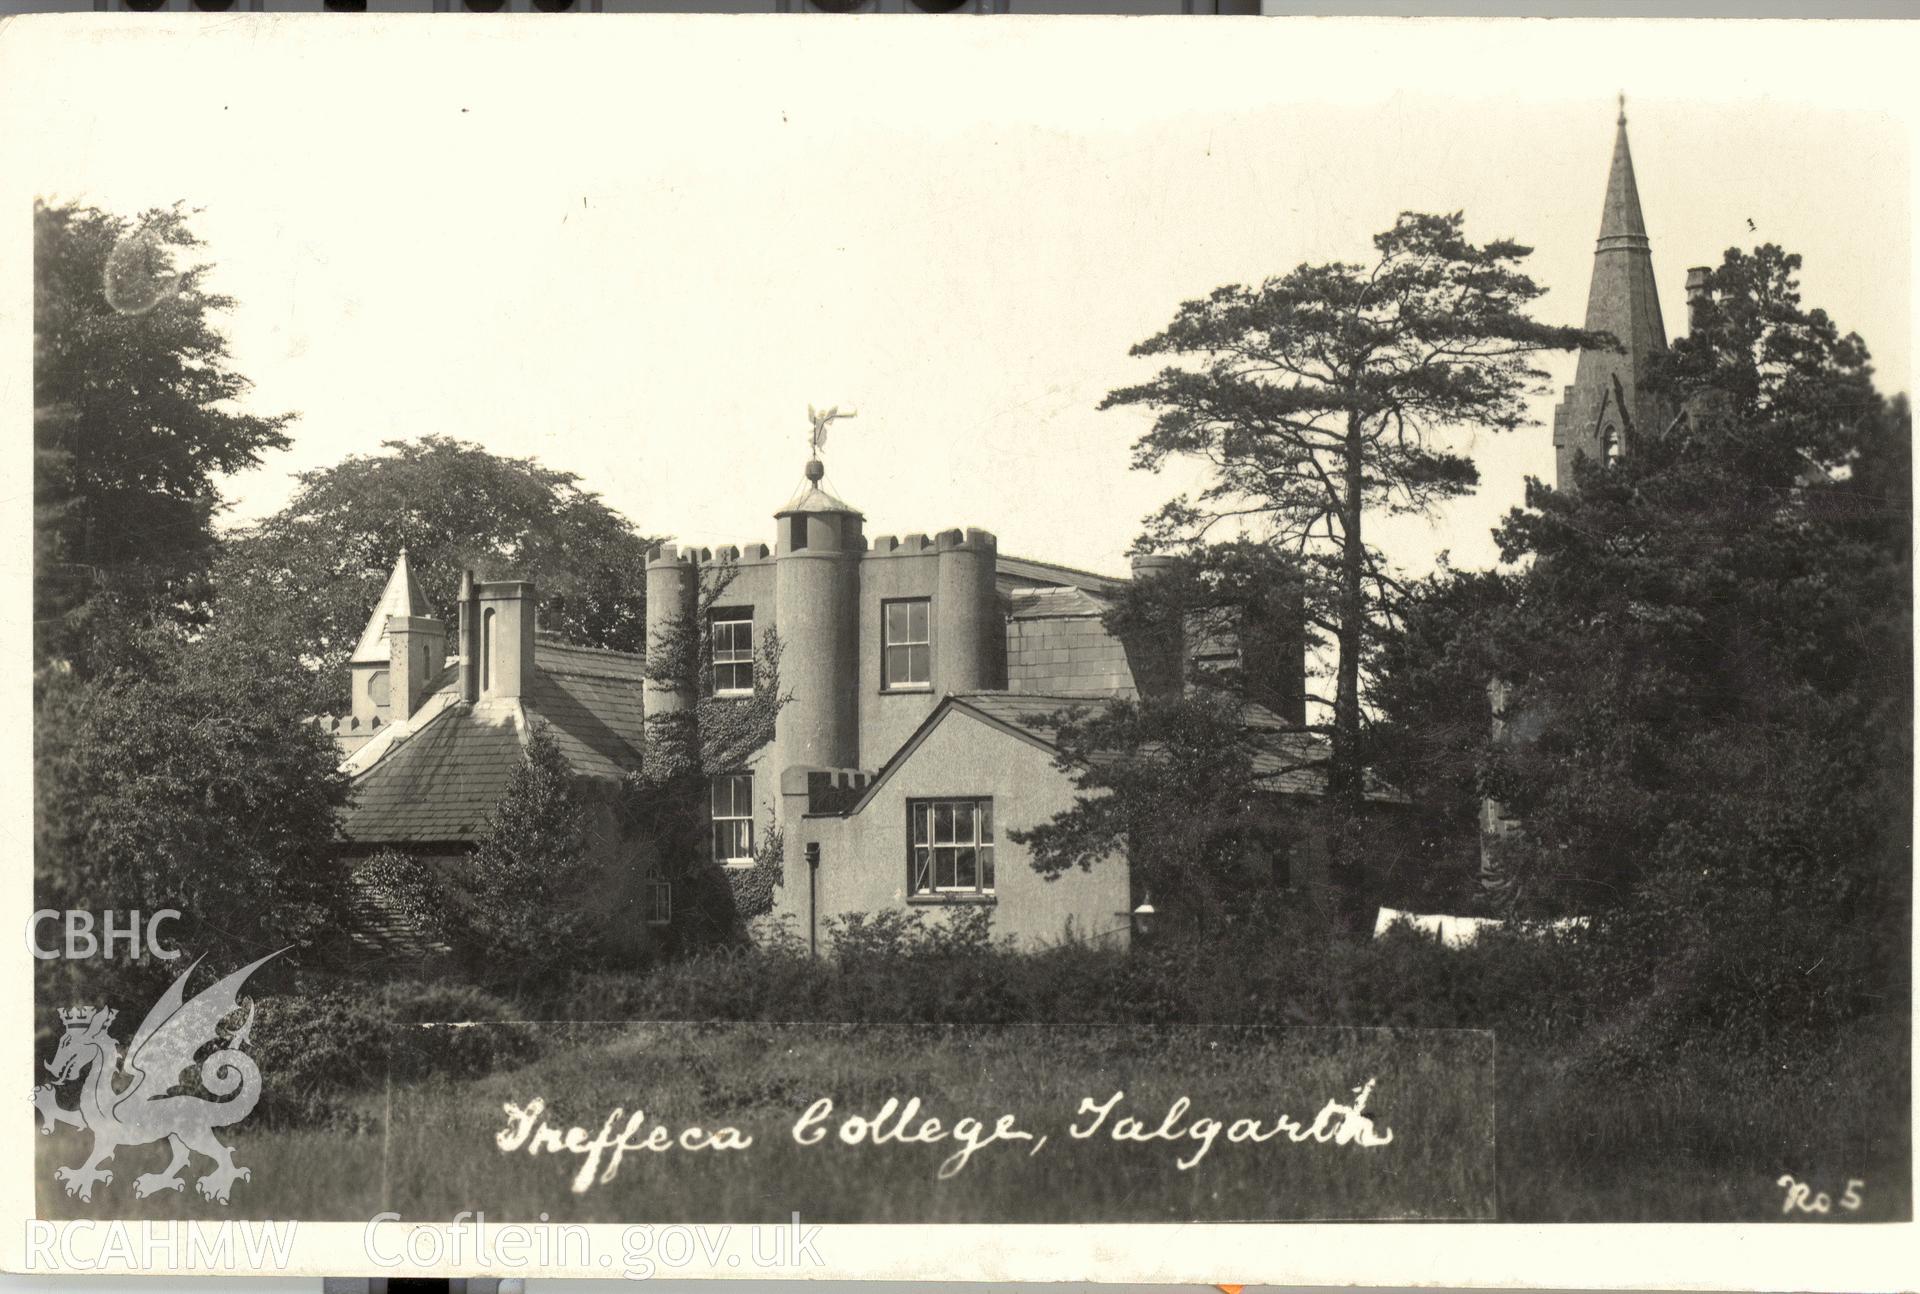 Digitised postcard image of Trefecca College, Talgarth, P.B. Abery, West End Studios, Builth Wells. Produced by Parks and Gardens Data Services, from an original item in the Peter Davis Collection at Parks and Gardens UK. We hold only web-resolution images of this collection, suitable for viewing on screen and for research purposes only. We do not hold the original images, or publication quality scans.